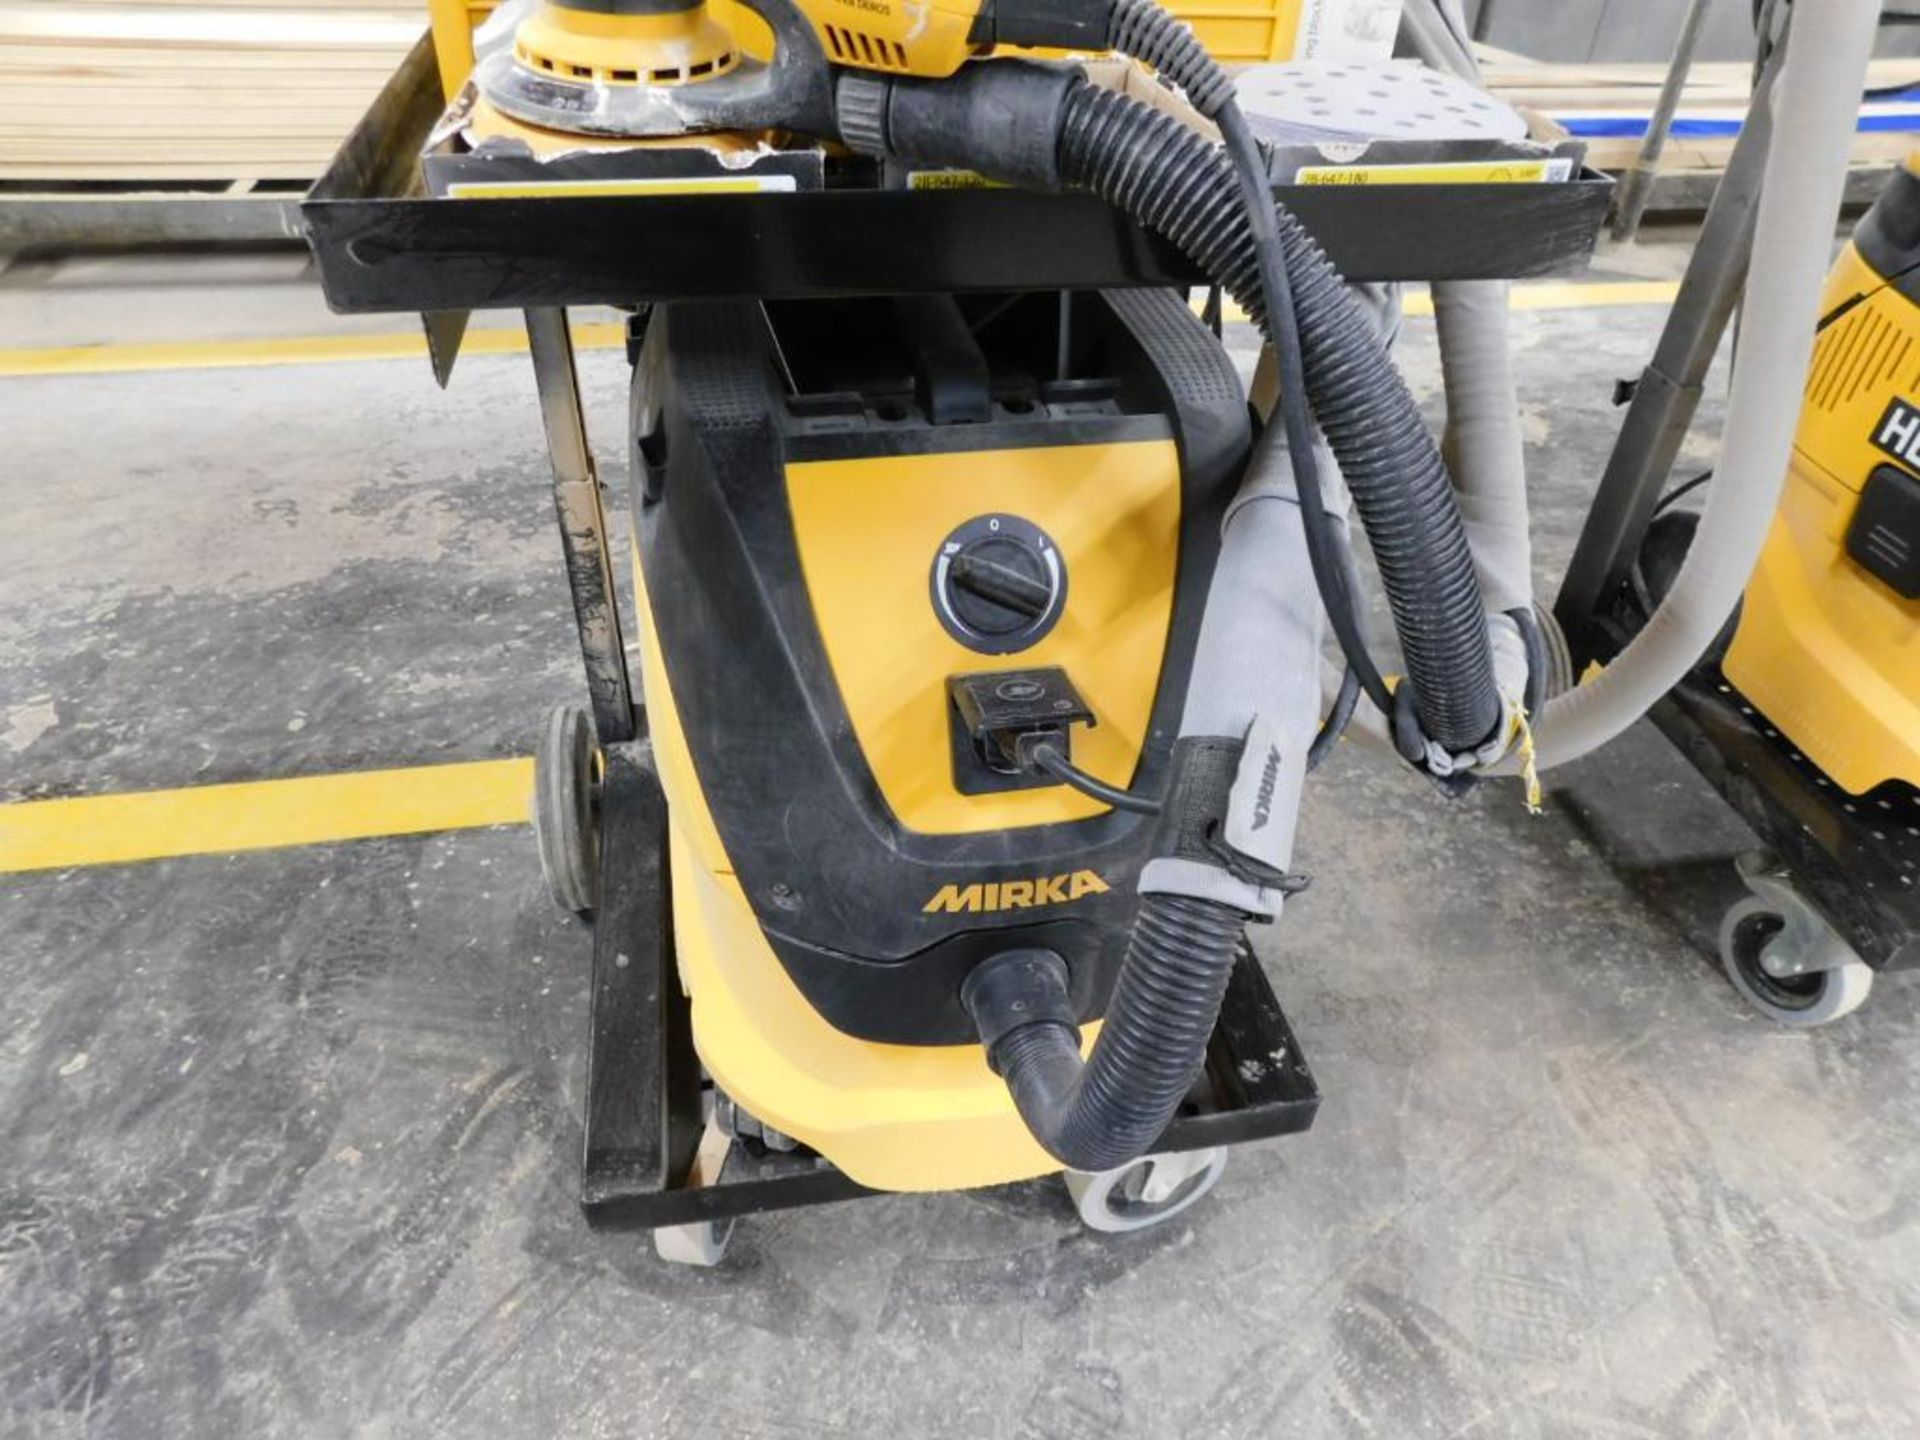 Mirka Deros Dust Free Sanding System, Pneumatic Palm Sander with Portable Hepa Dust Collection Syste - Image 2 of 5